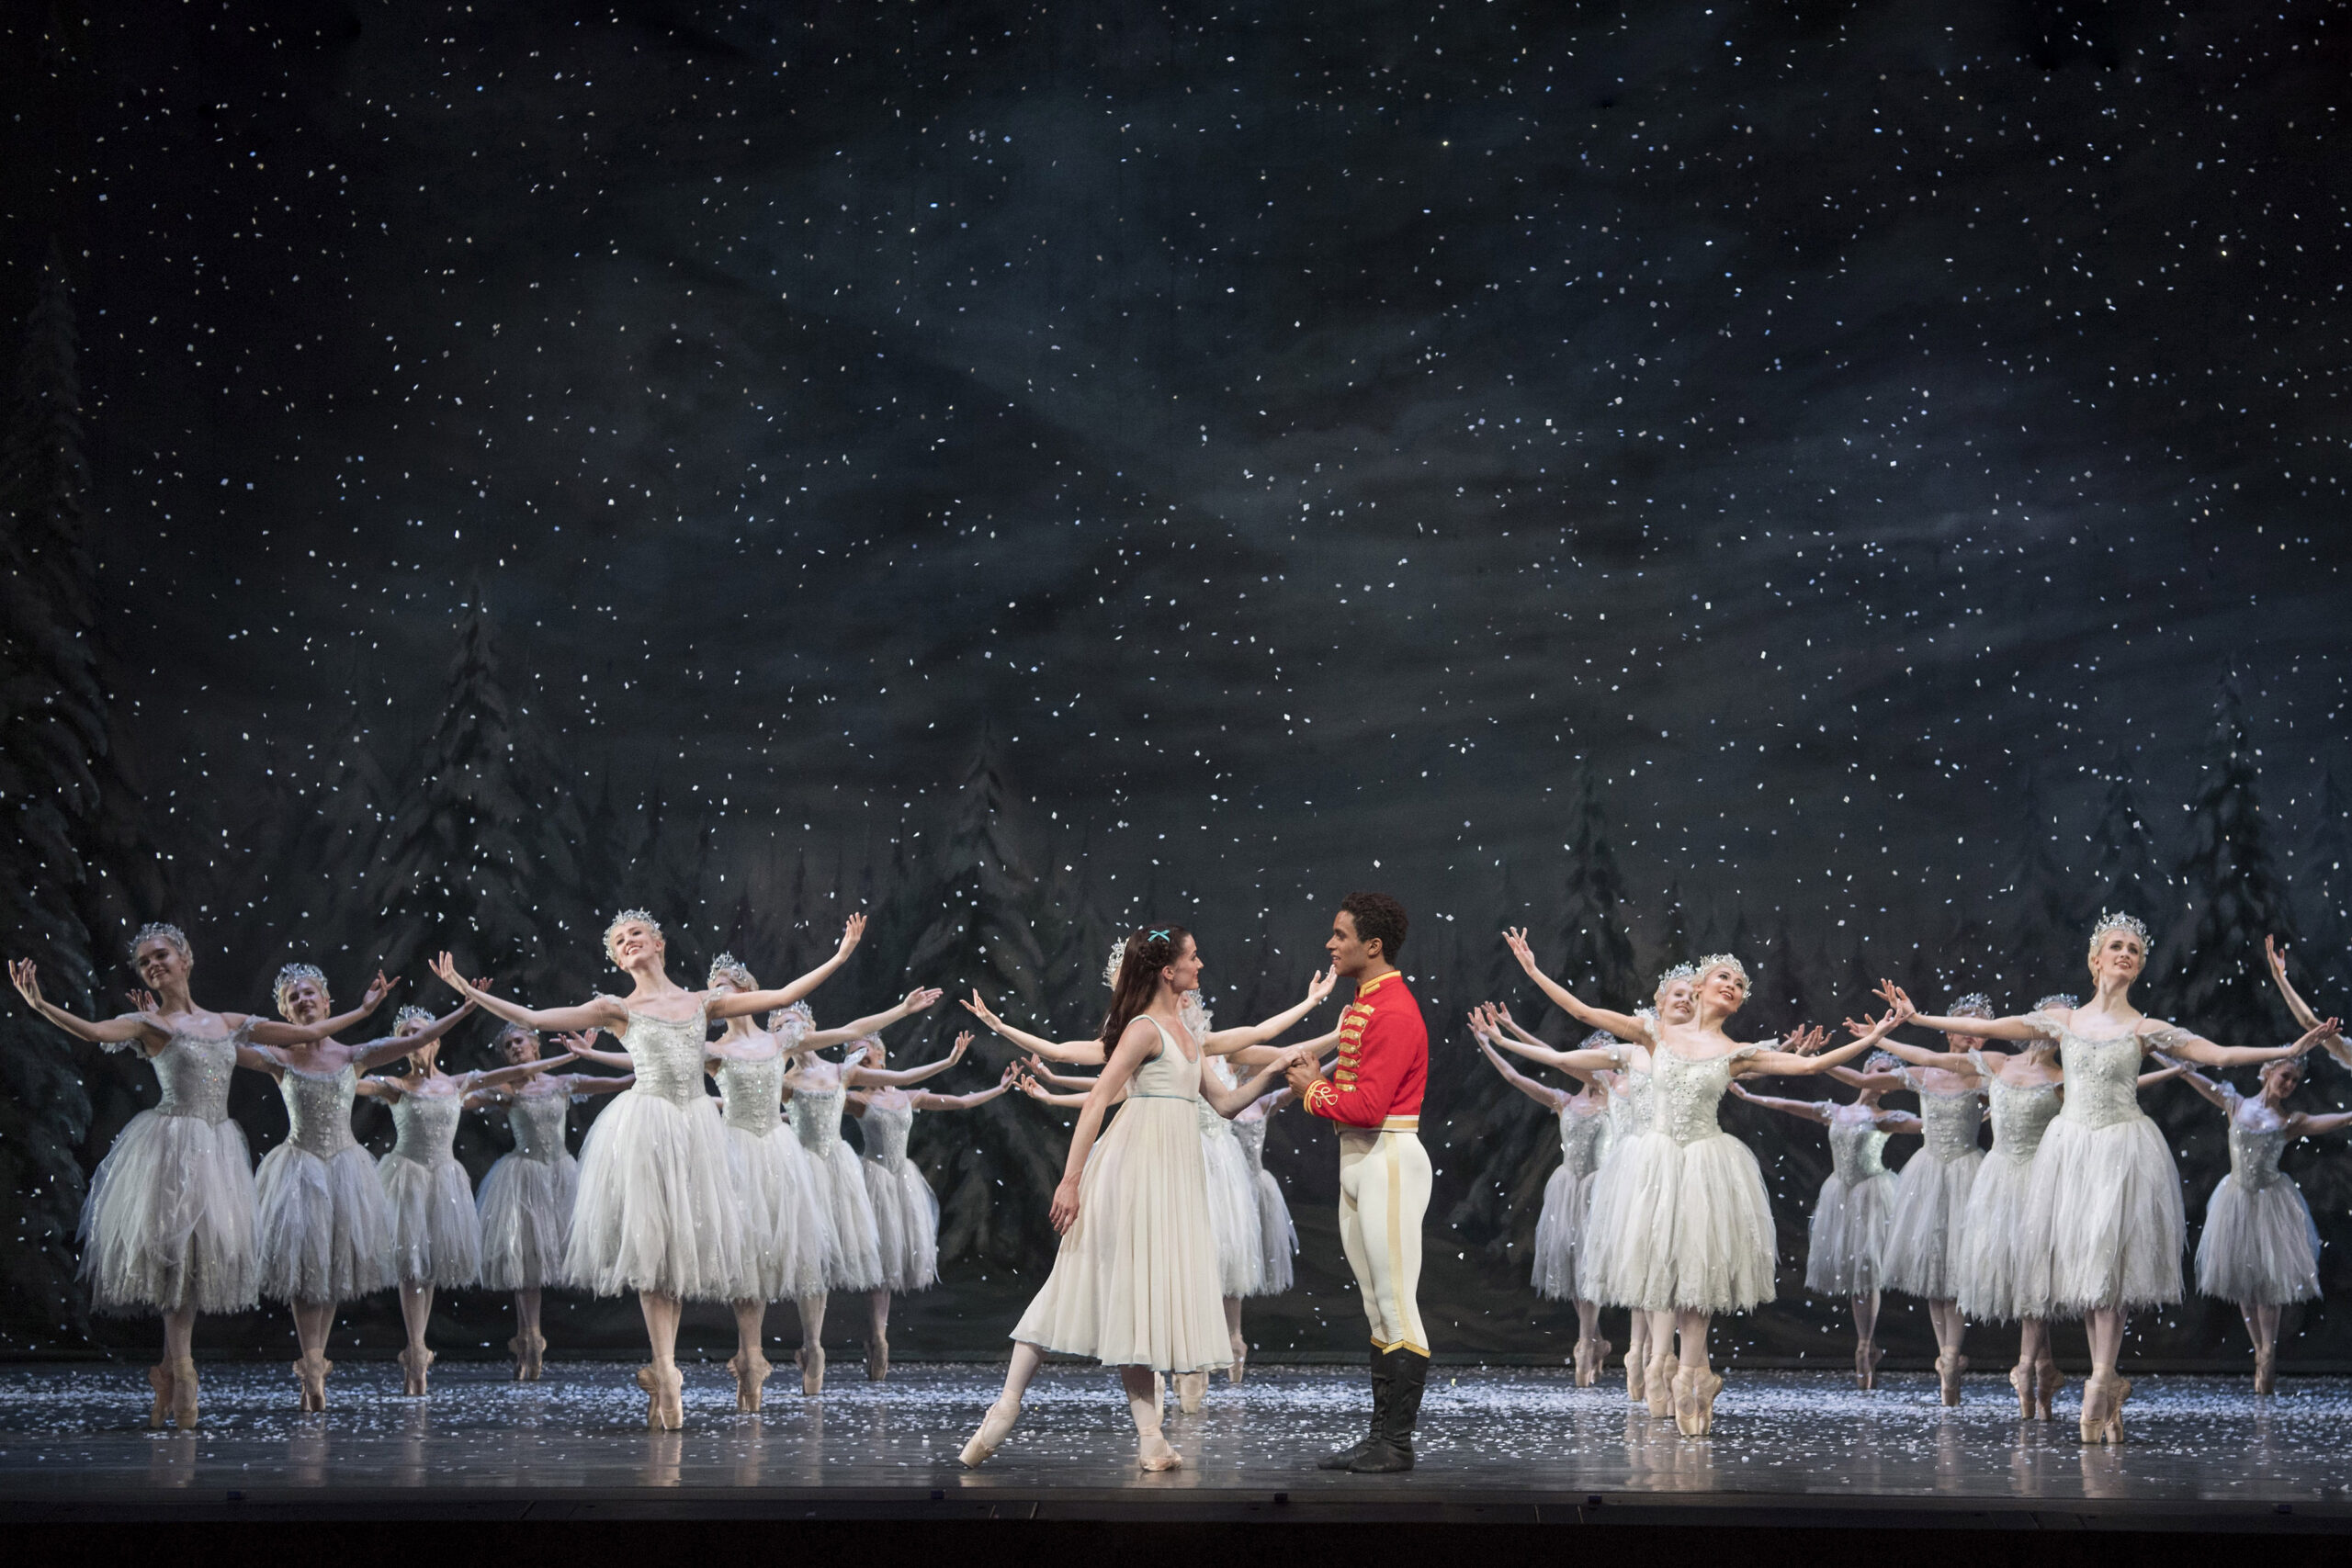 The Royal Ballet’s Cinderella celebrates its 75th anniversary in a new